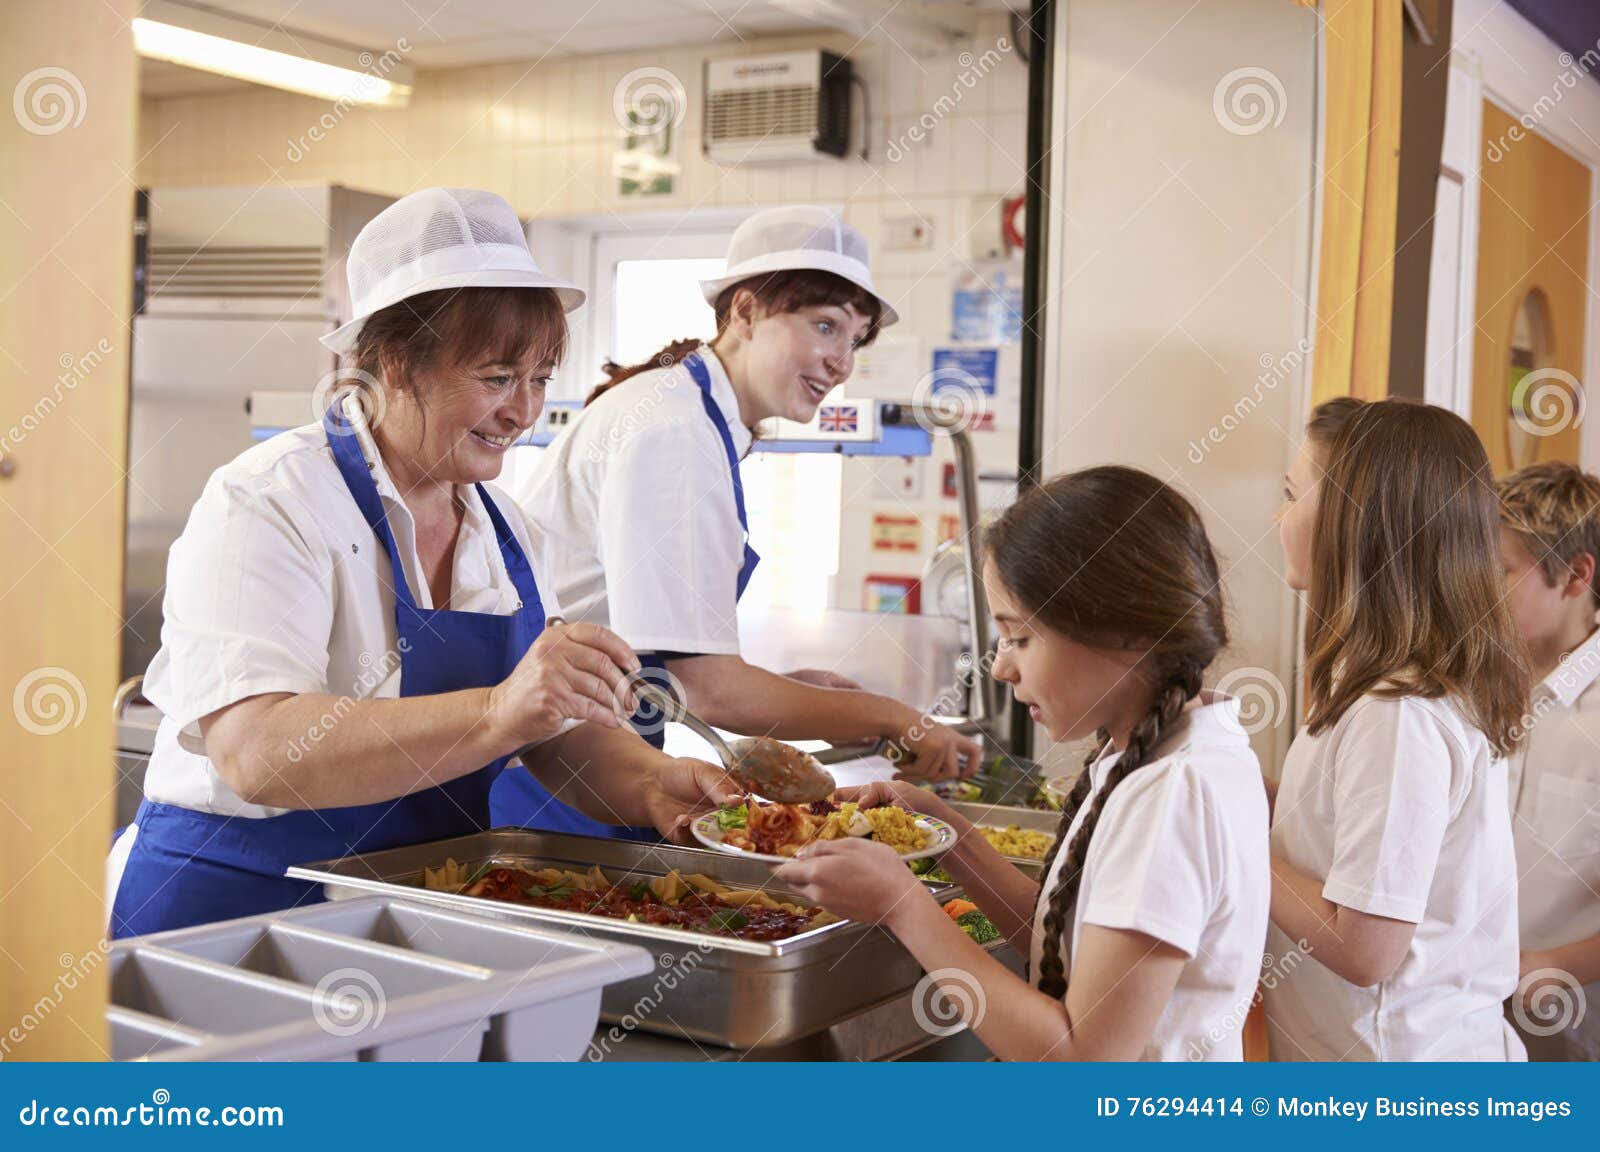 two women serving food to a girl in a school cafeteria queue